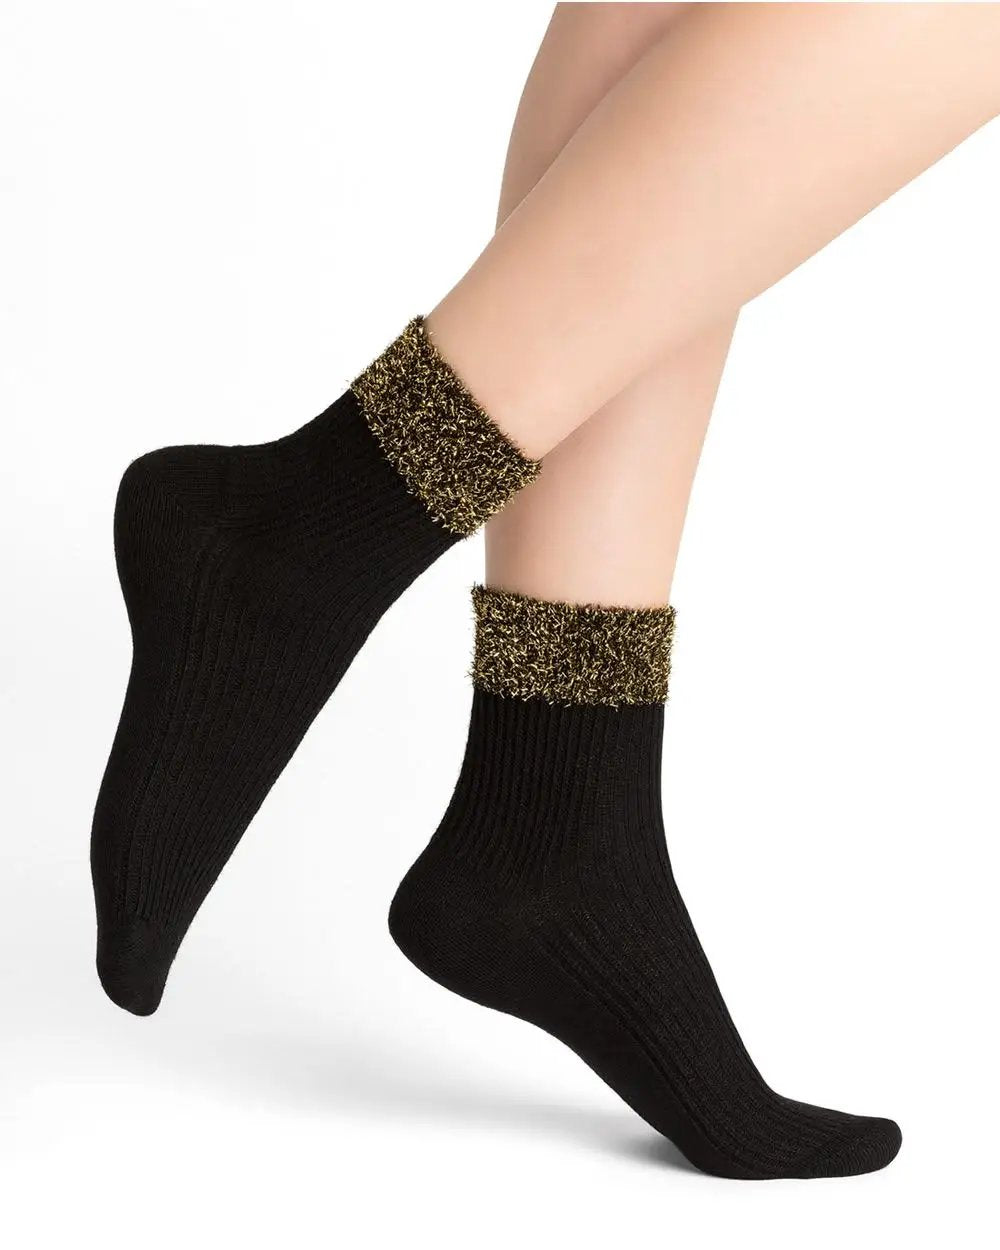 A woman's legs adorned with cute Bleuforet 6389 Garland Socks that add a festive flare.